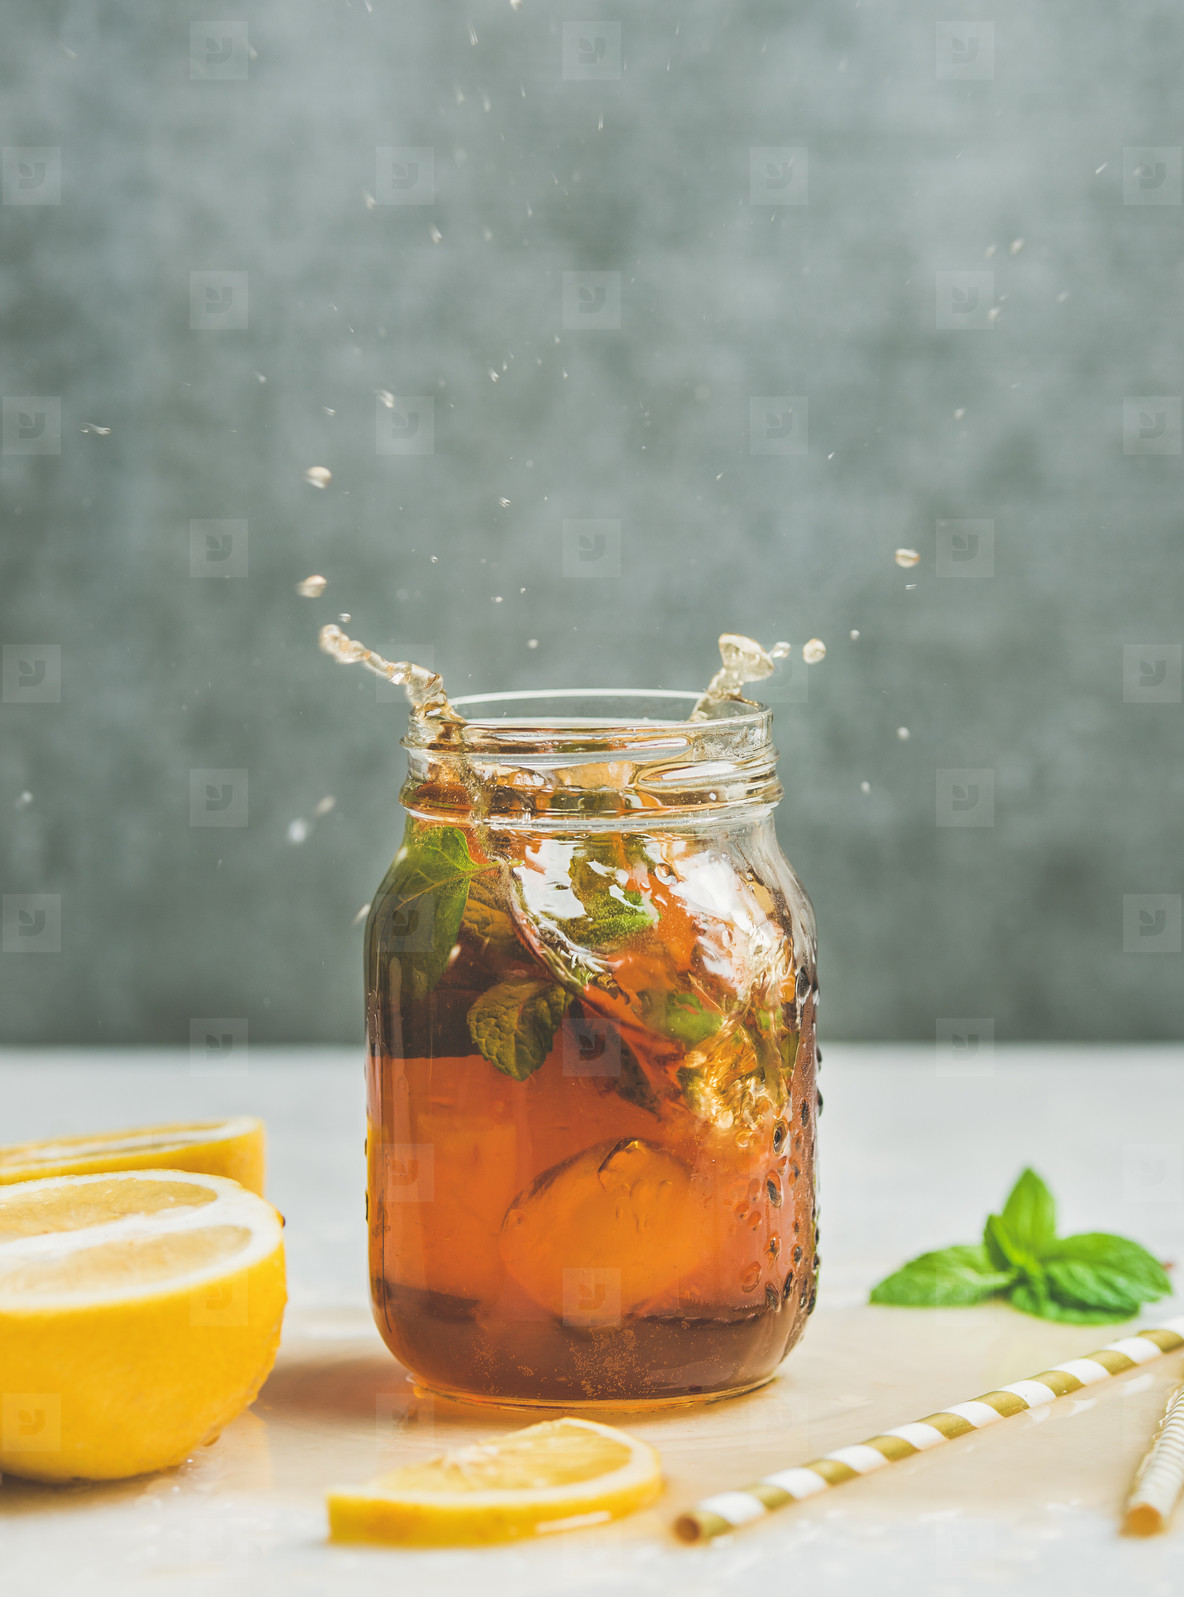 Summer Iced tea with lemon and herbs  copy space